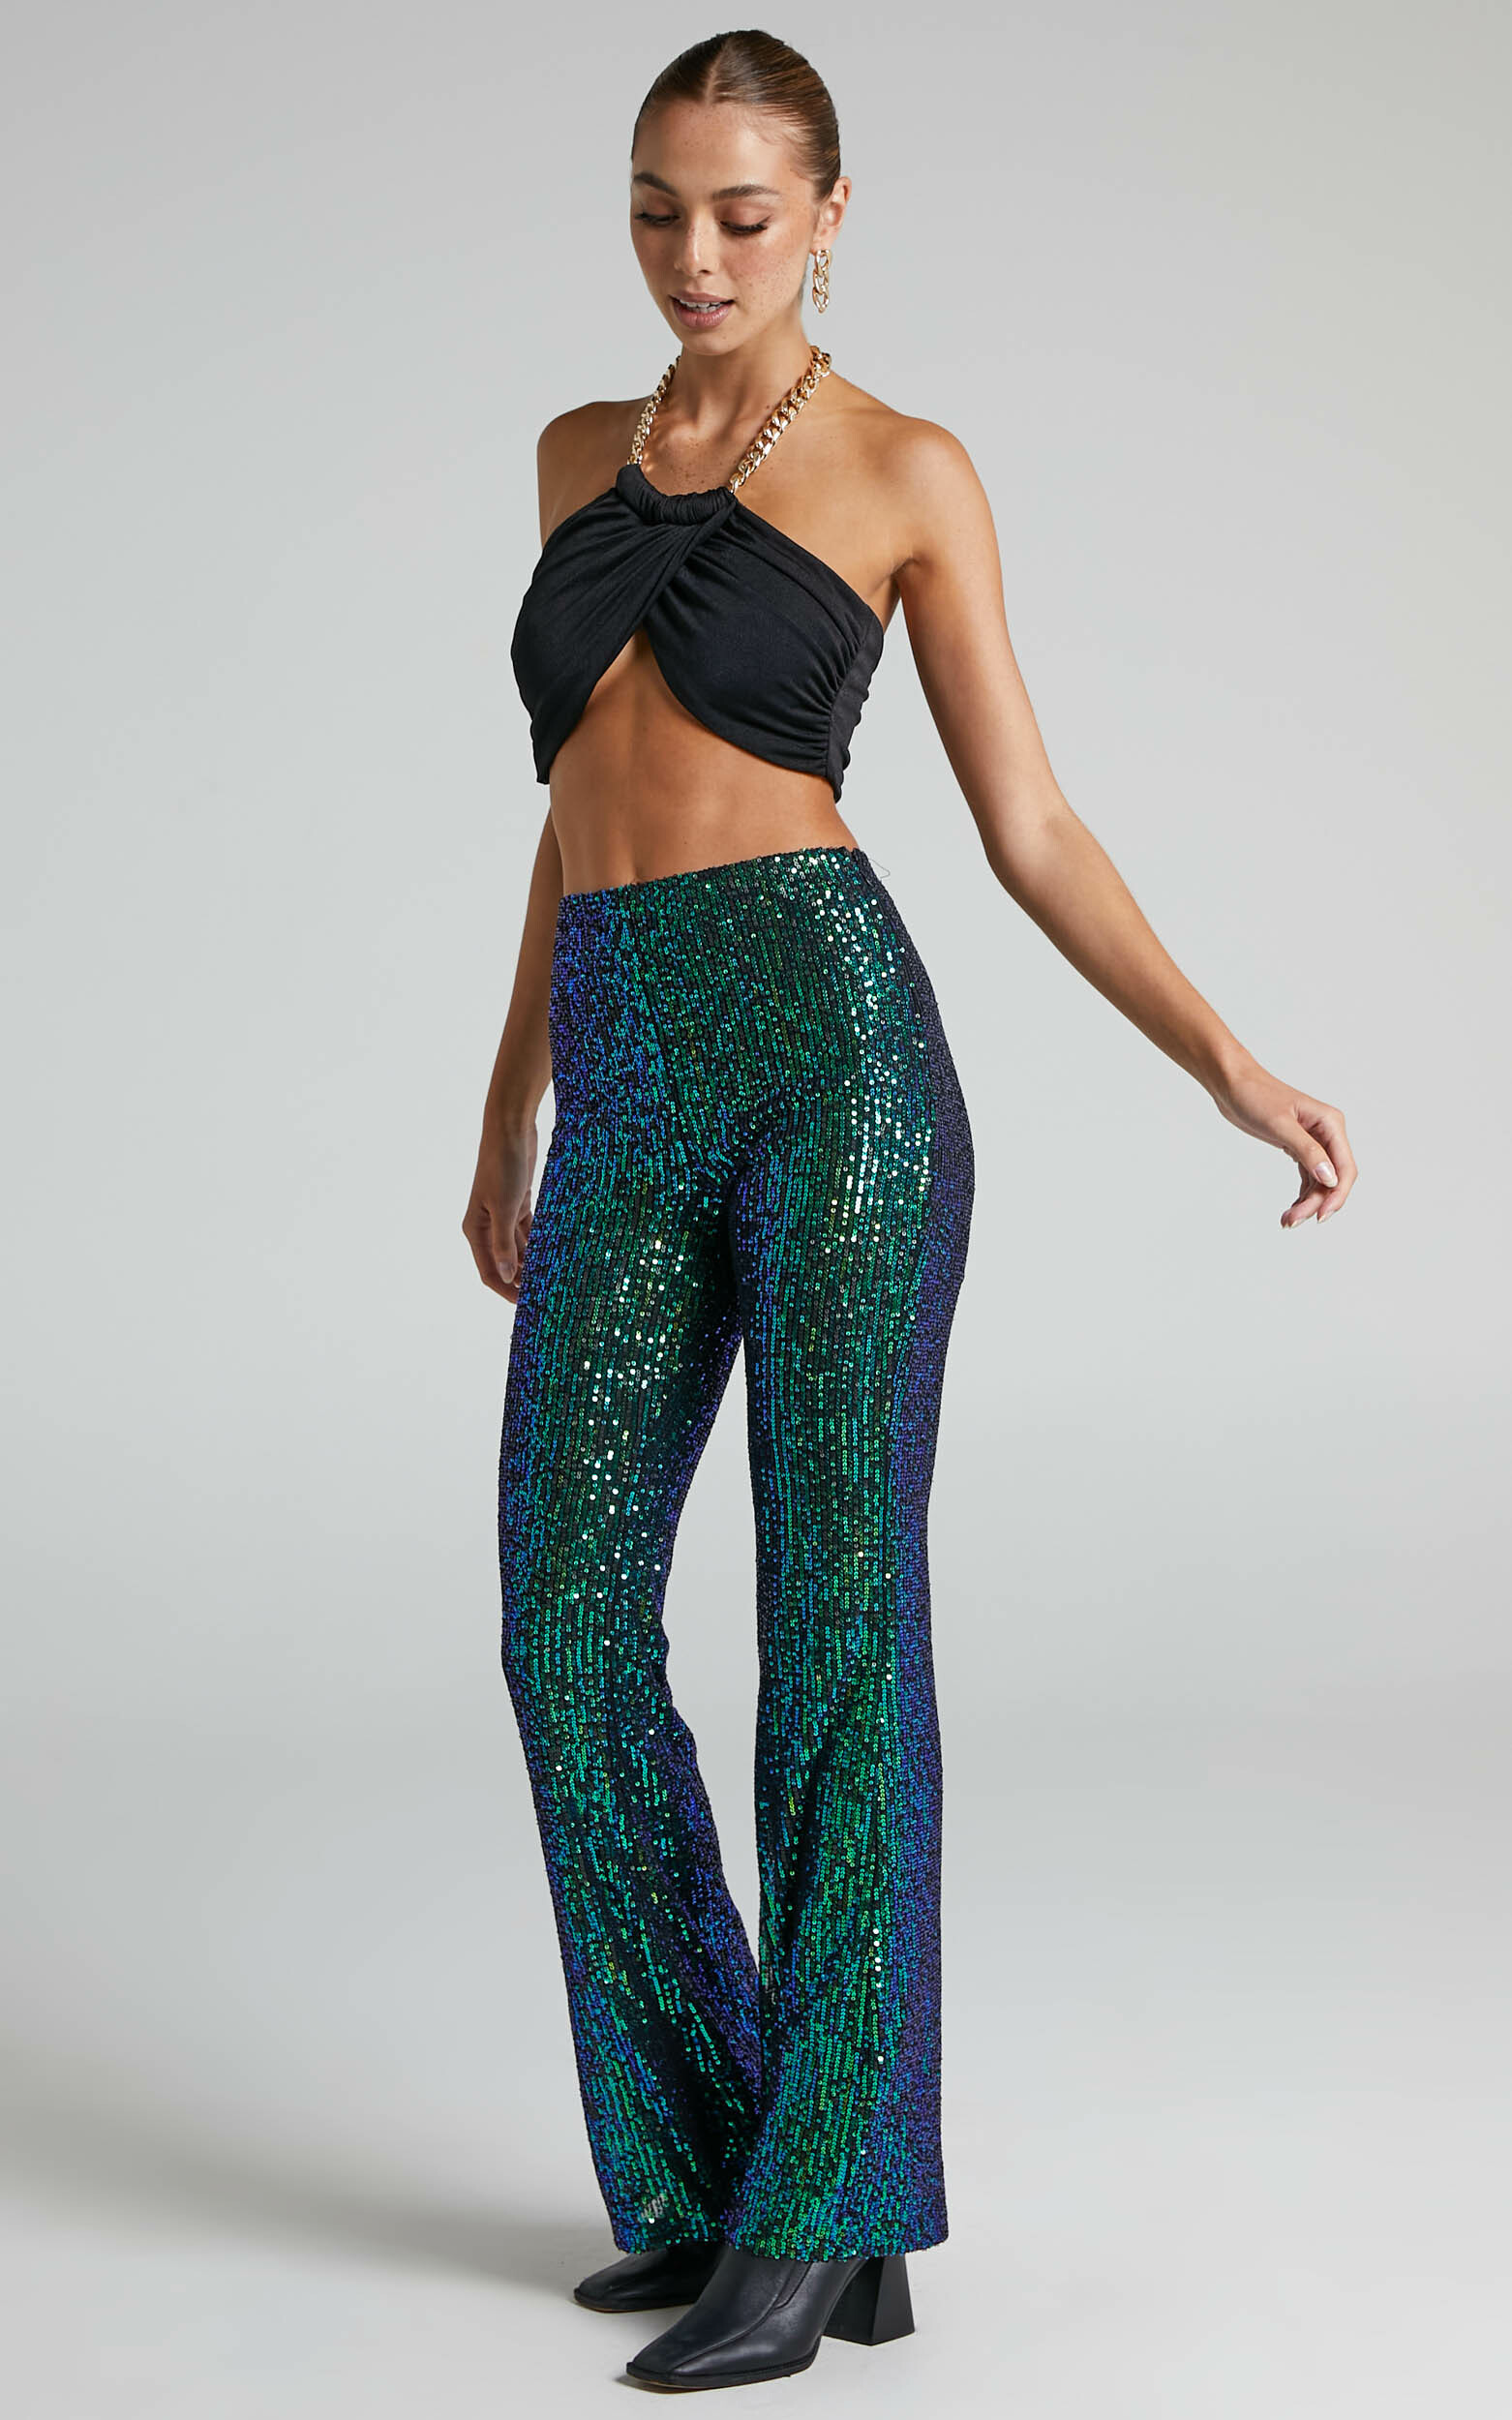 Deliza High Waisted Sequins Flare Pants in Mermaid Teal - 06, GRN1, hi-res image number null